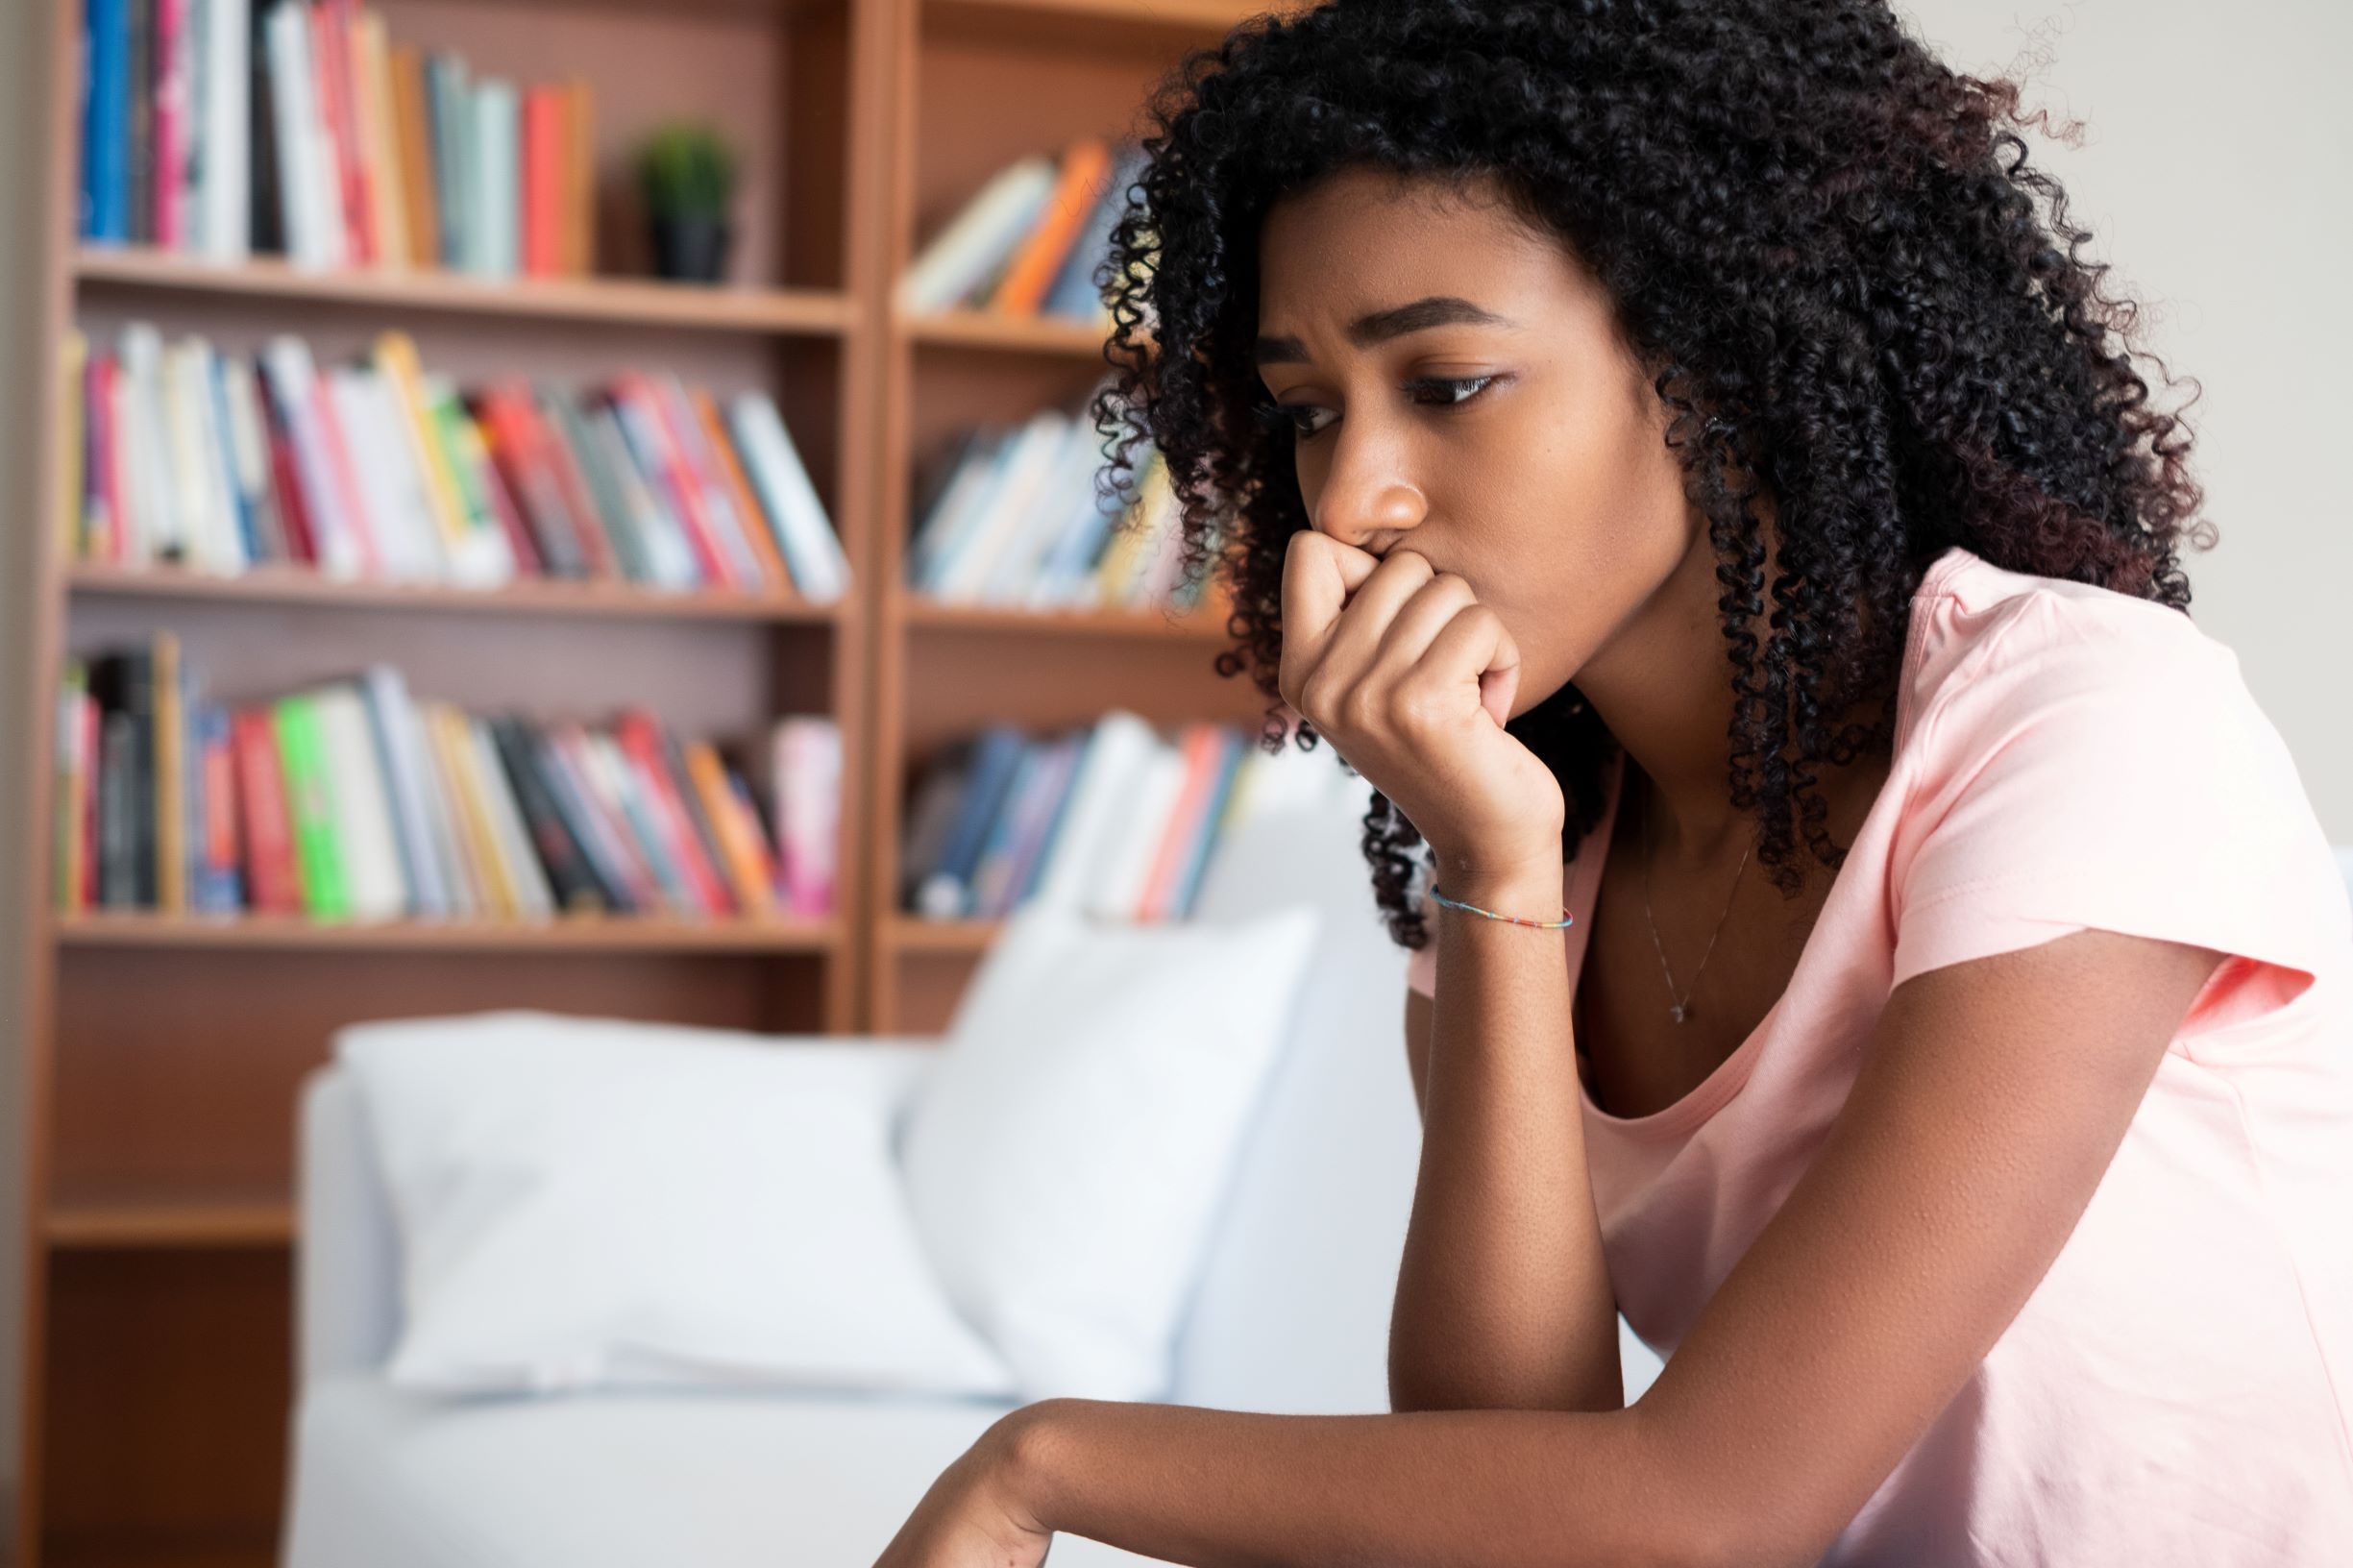 There are several ways to manage anxiety during the coronavirus pandemic. If you need help, reach out to a professional or speak with friends and family.